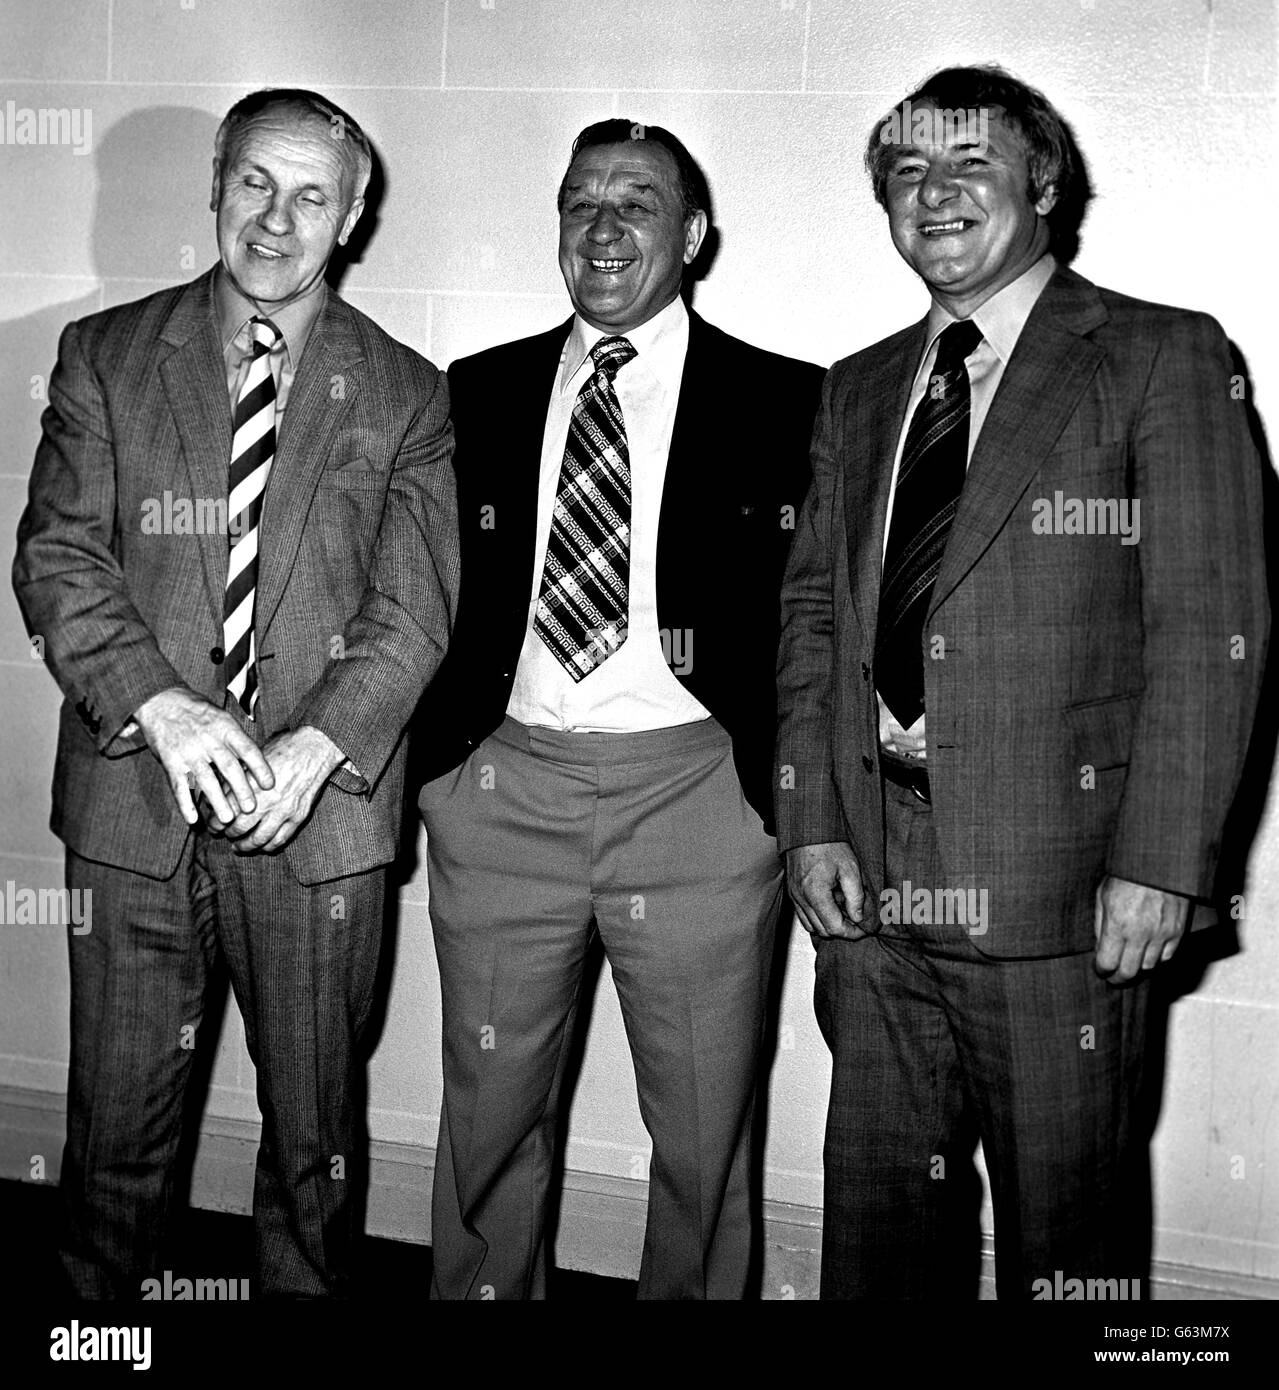 Liverpool's Bob Paisley (centre) footbal Manager of the Year for the second year running, is congratulated by former Liverpool Manager, Bill Shankly, left, and Tommy Docherty, Manager of Manchester United who beat Liverpool in the FA Cup, after presentation to Bob Paisley at Cafe Royal. Stock Photo